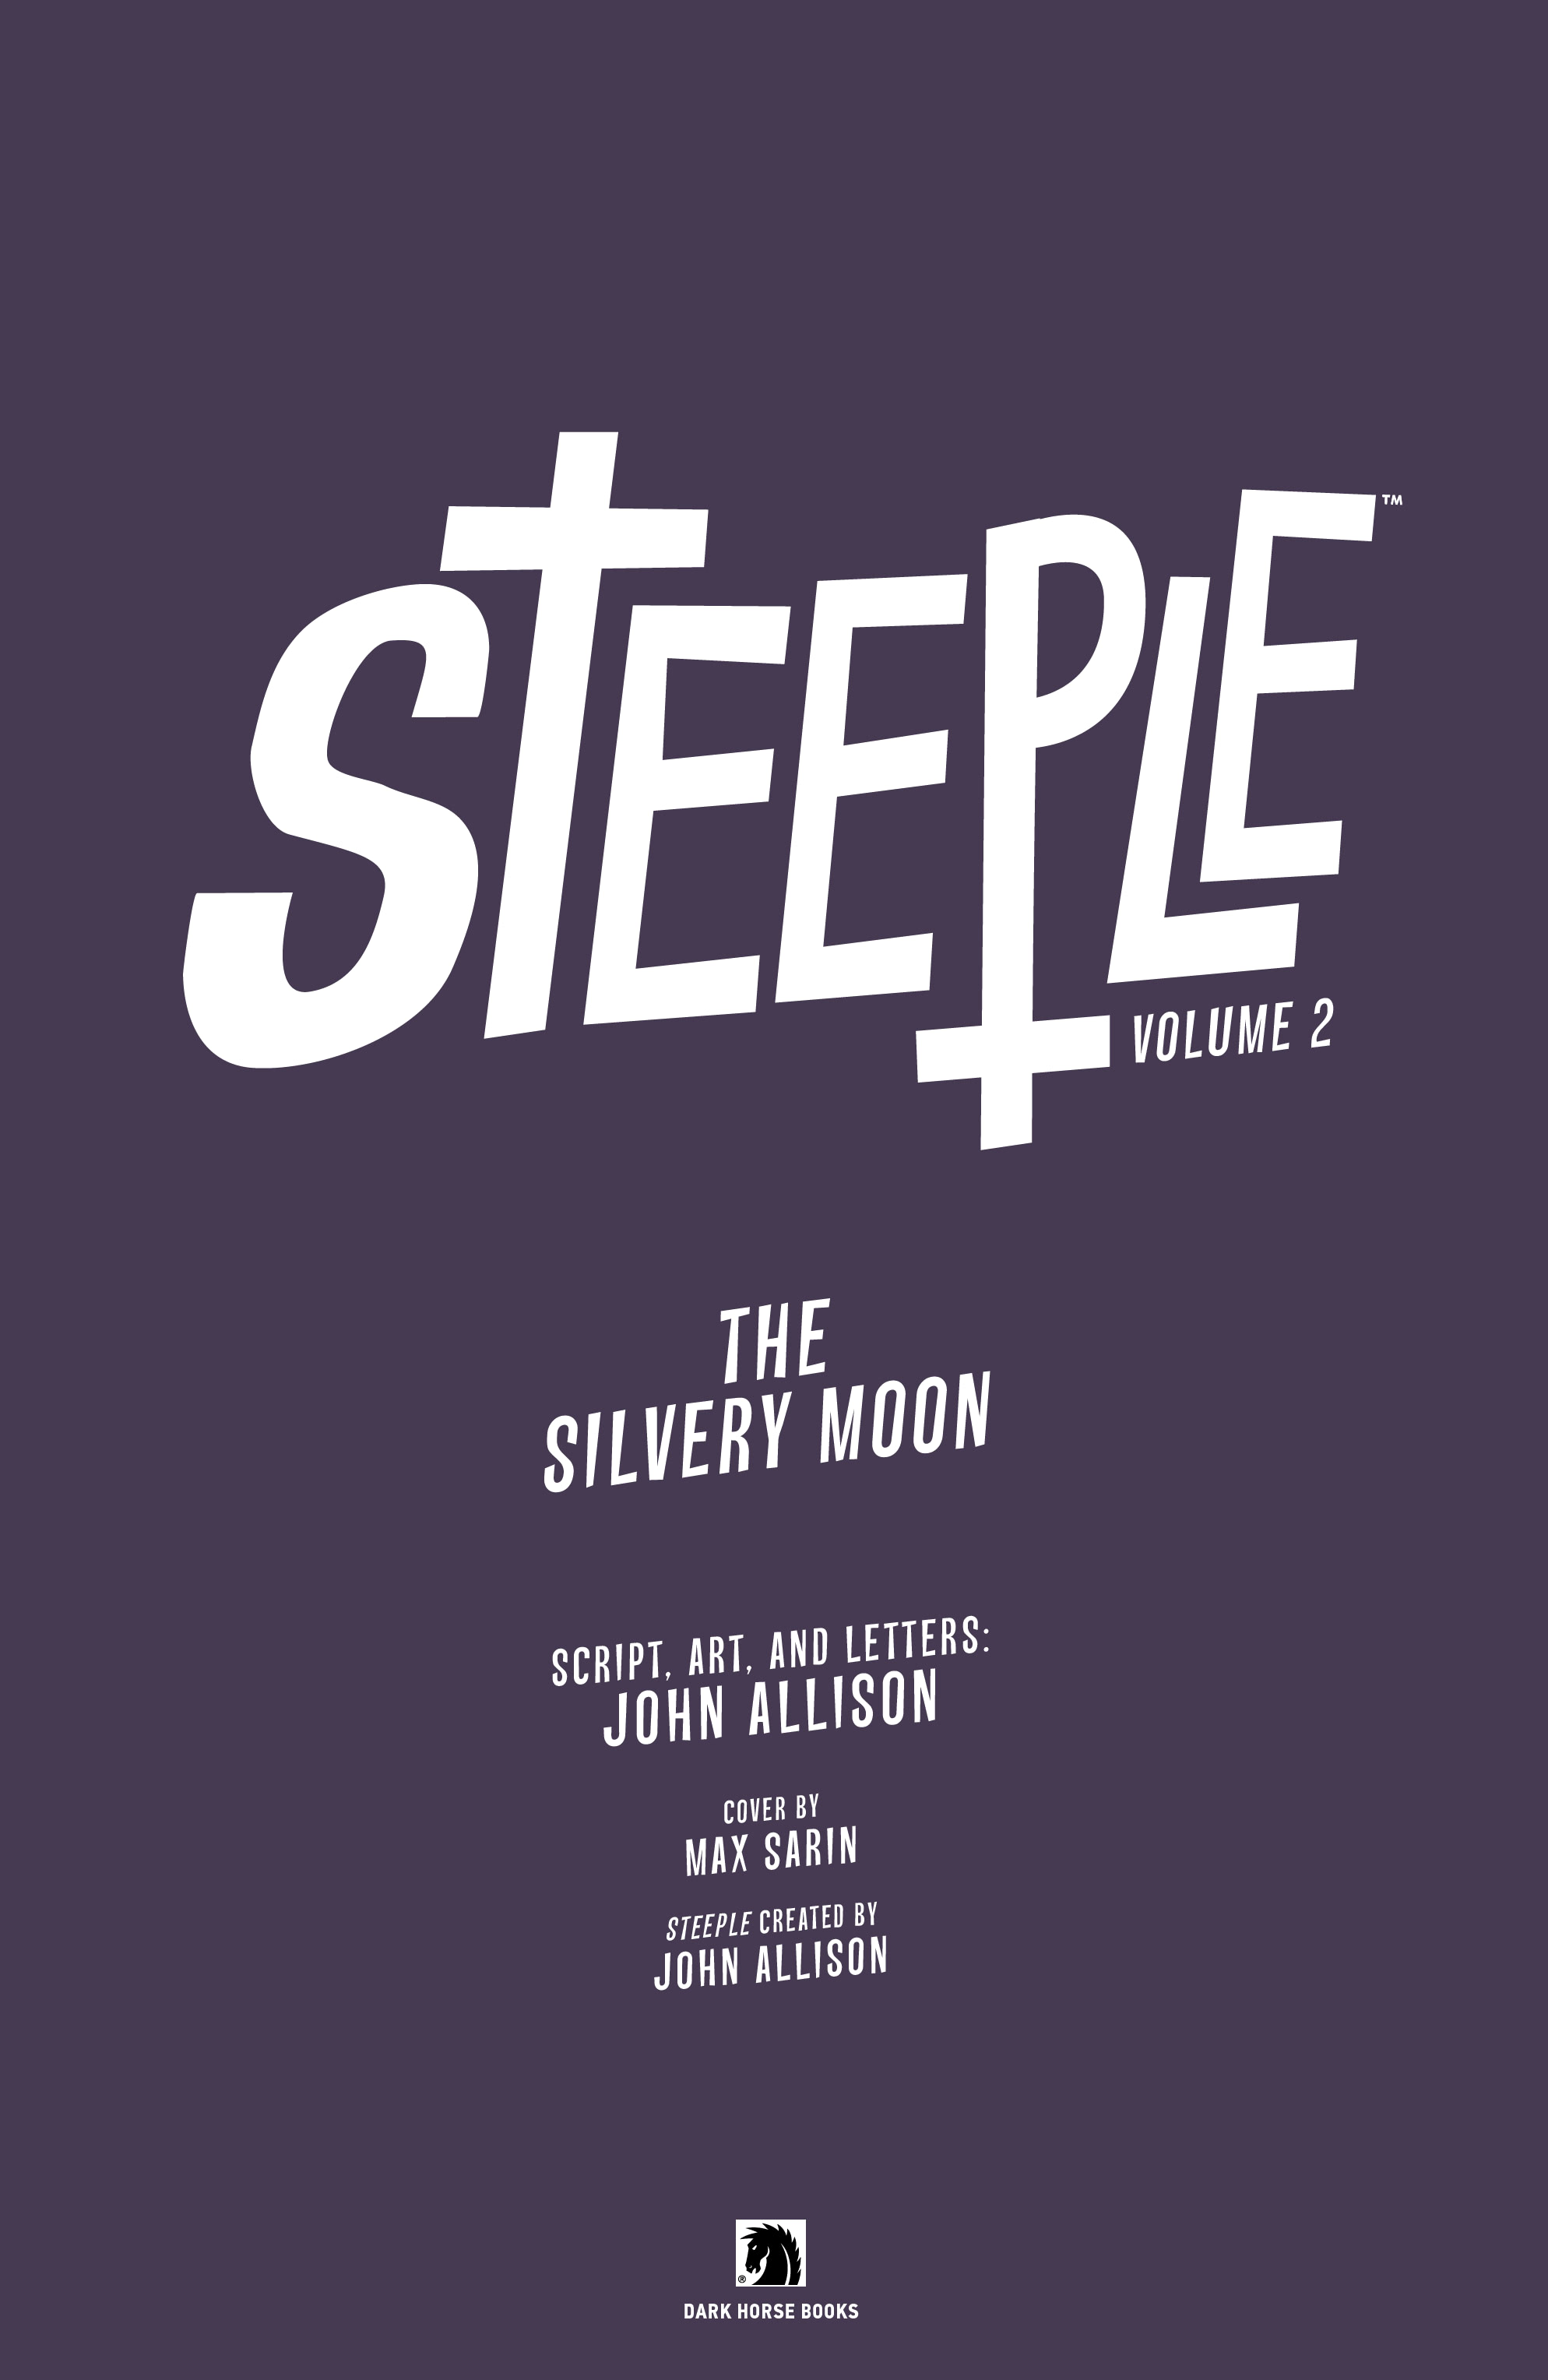 Steeple Vol. 2: The Silvery Moon (2021): Chapter GN - Page 4